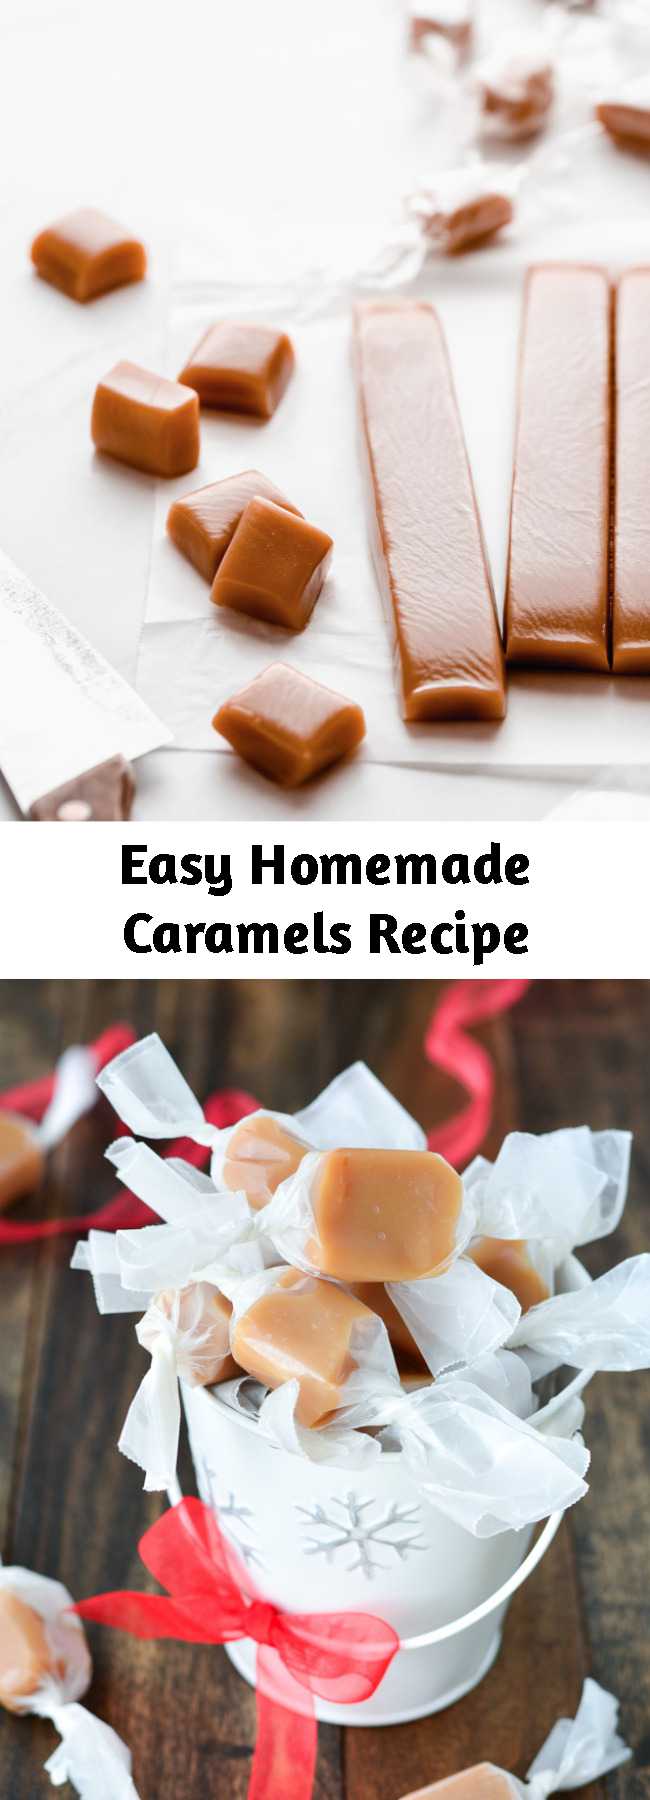 Easy Homemade Caramels Recipe - Soft, buttery, melt-in-your-mouth Homemade Caramels are the perfect holiday gift! Package them up and enjoy this heavenly candy all season long.